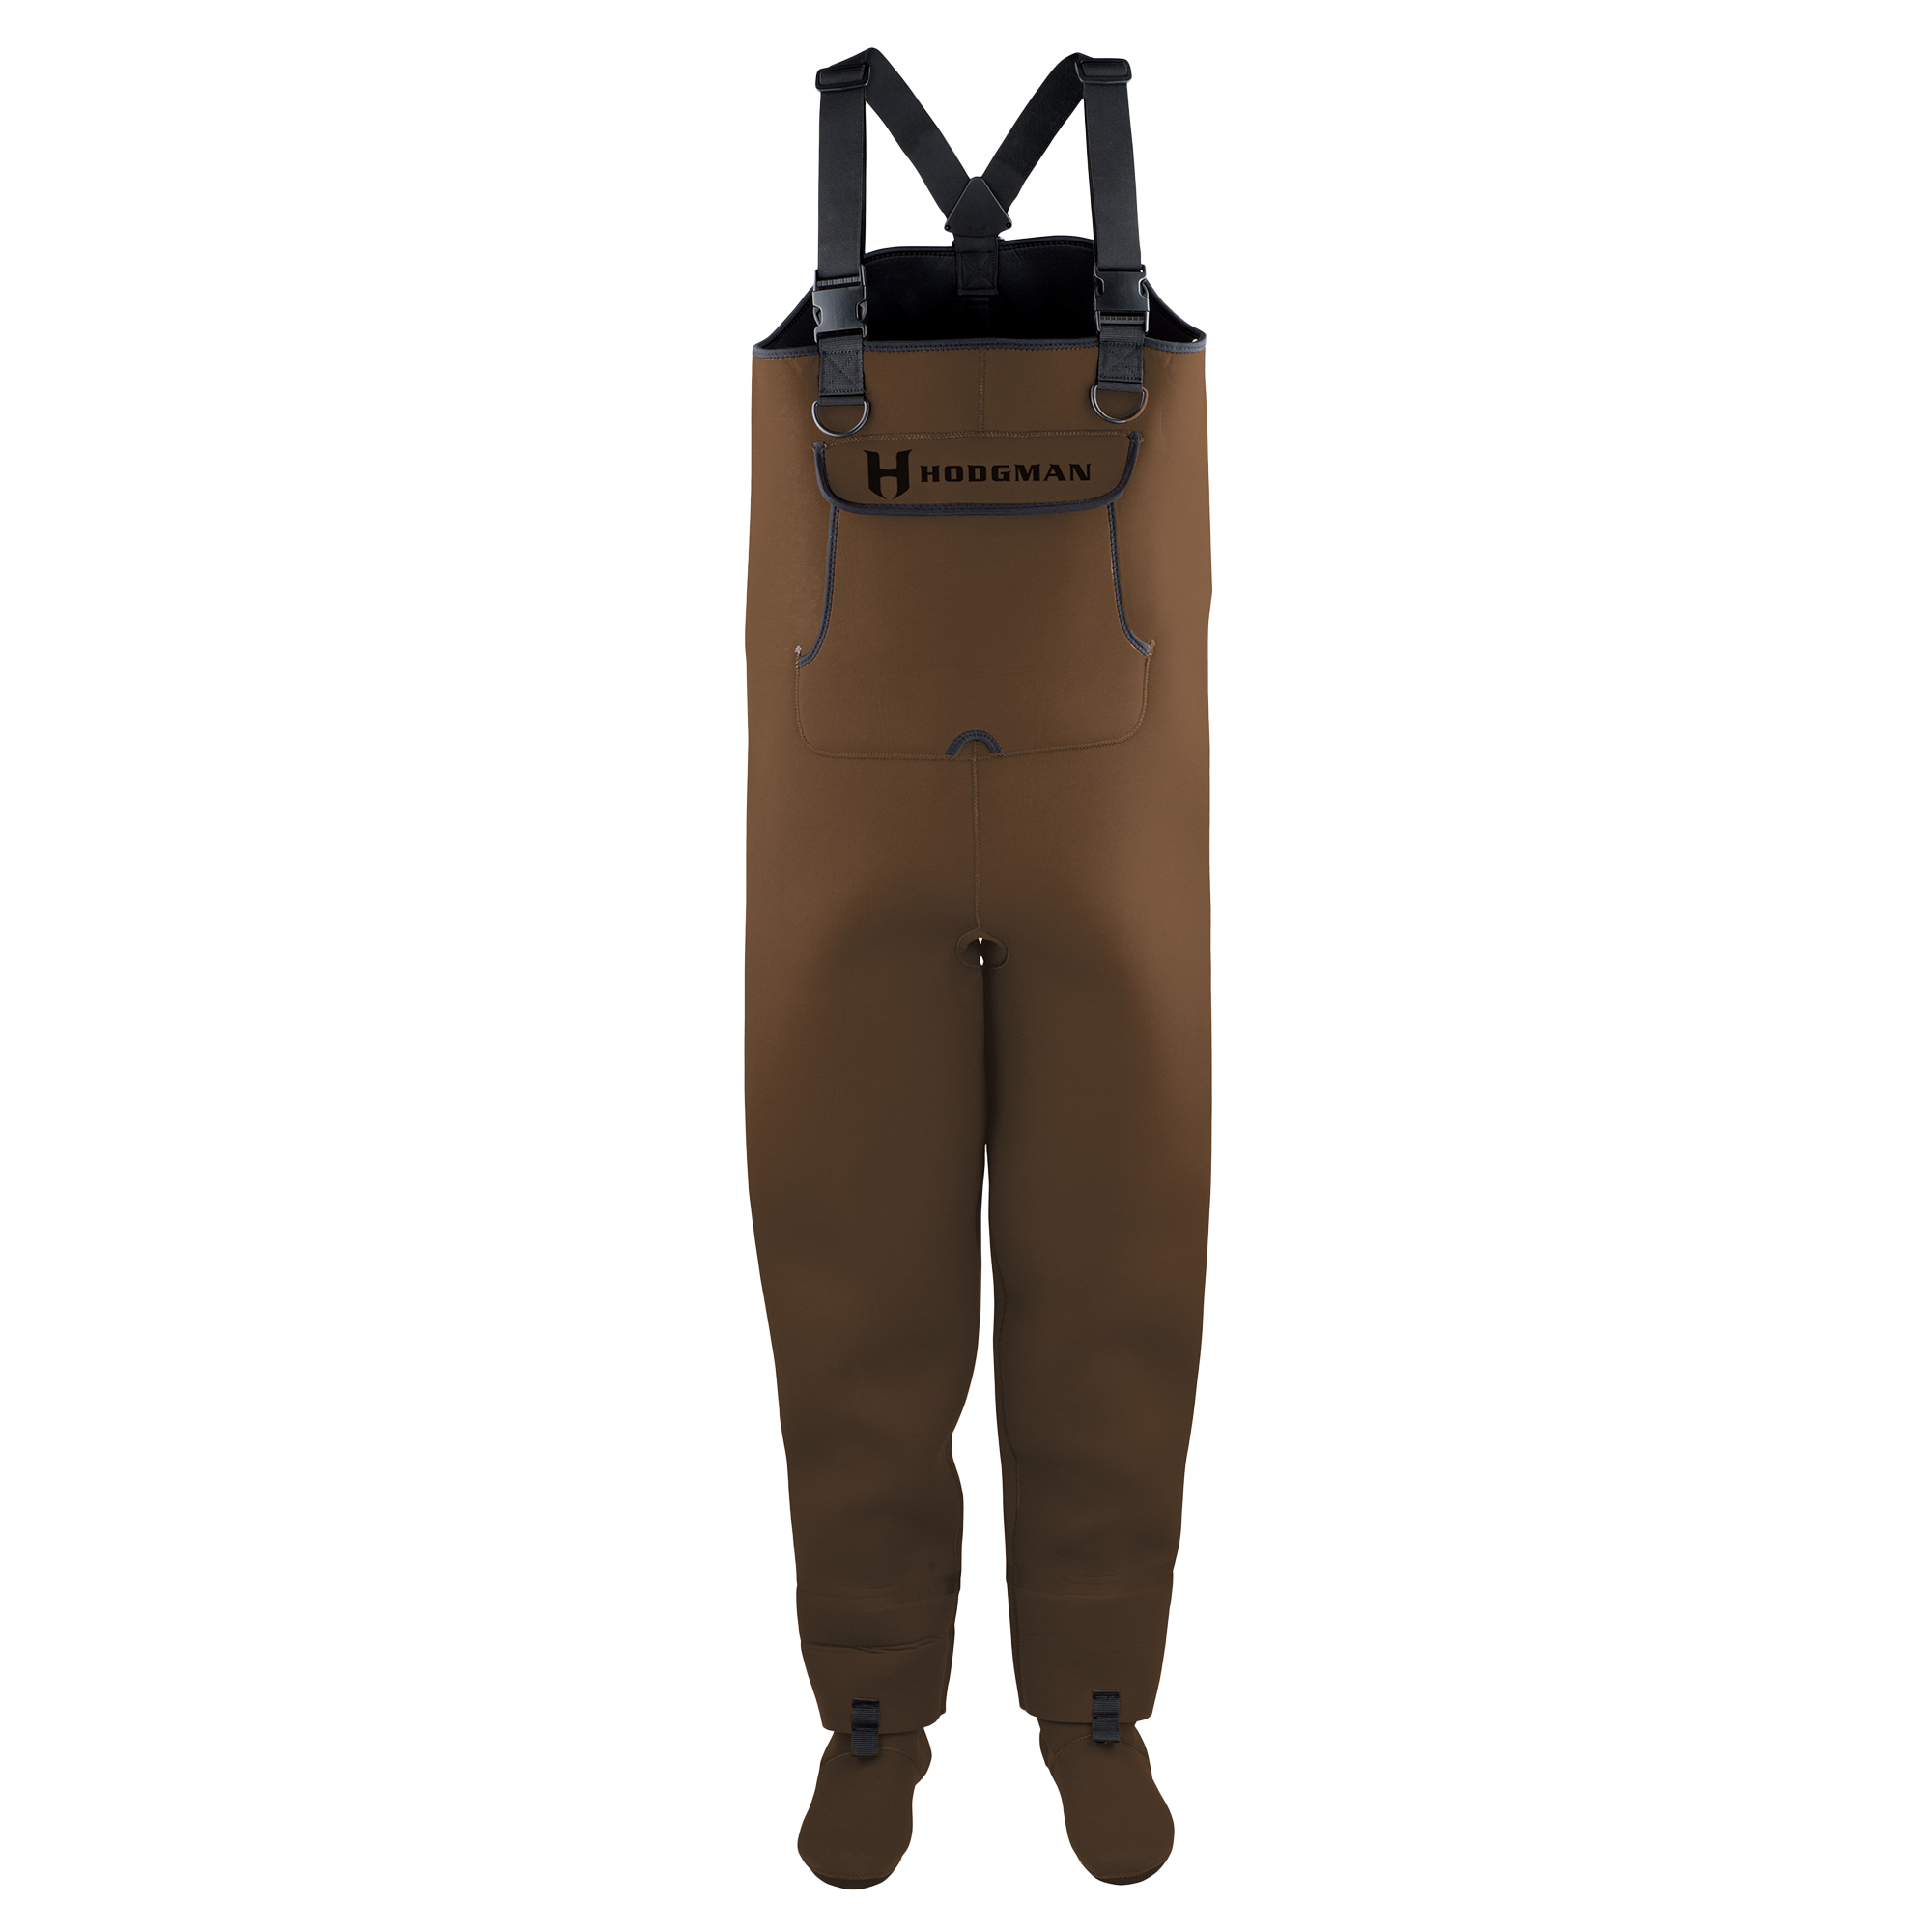 Cabelas Dry-Plus Stocking-Foot Trout Fishing Waders for Men Tan MR 83-0203  (I6)